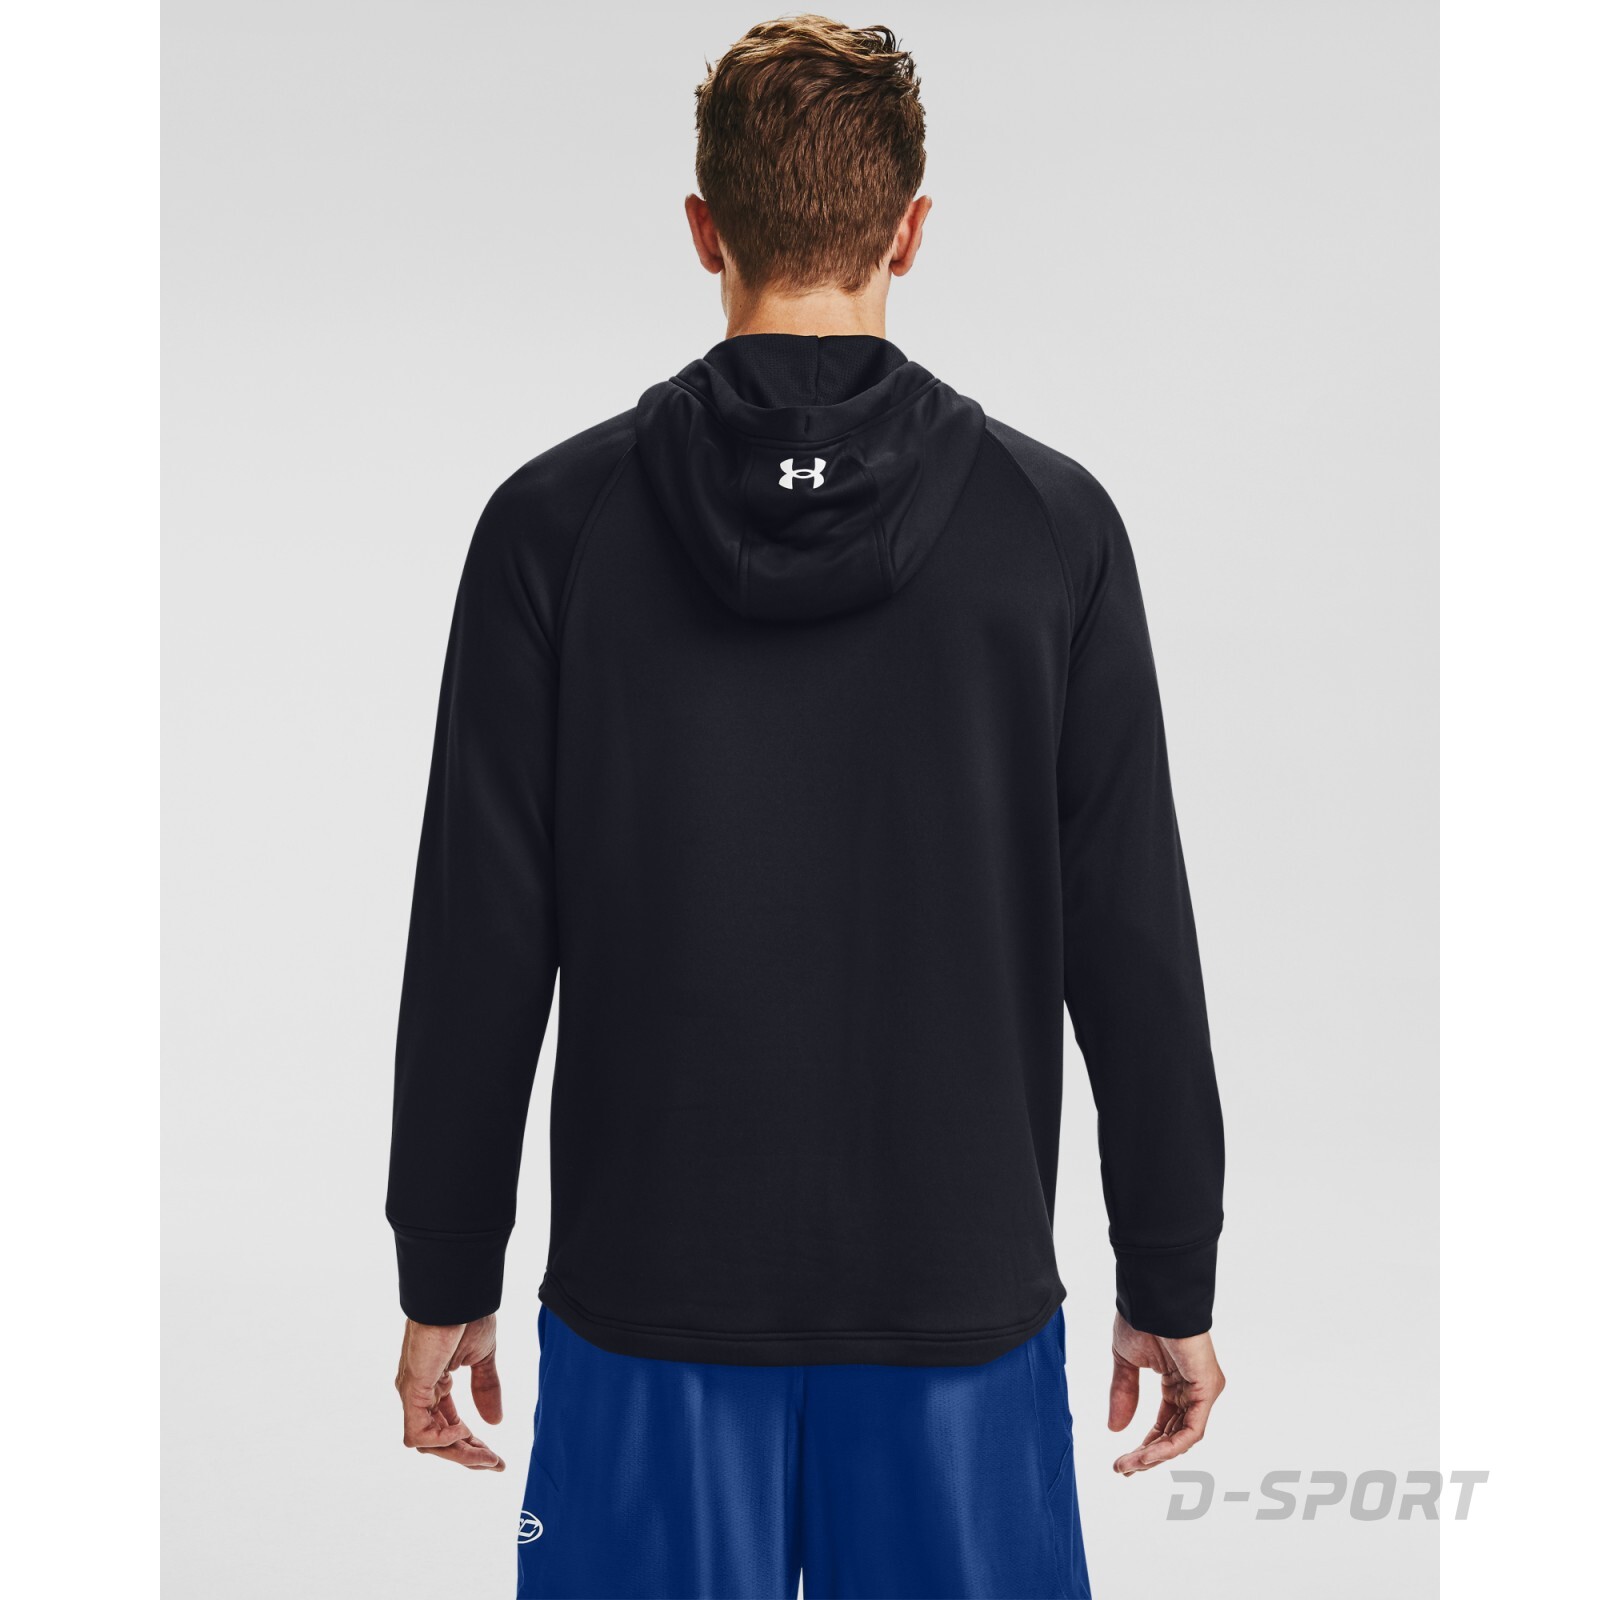 UNDER ARMOUR CURRY PULLOVER HOODY